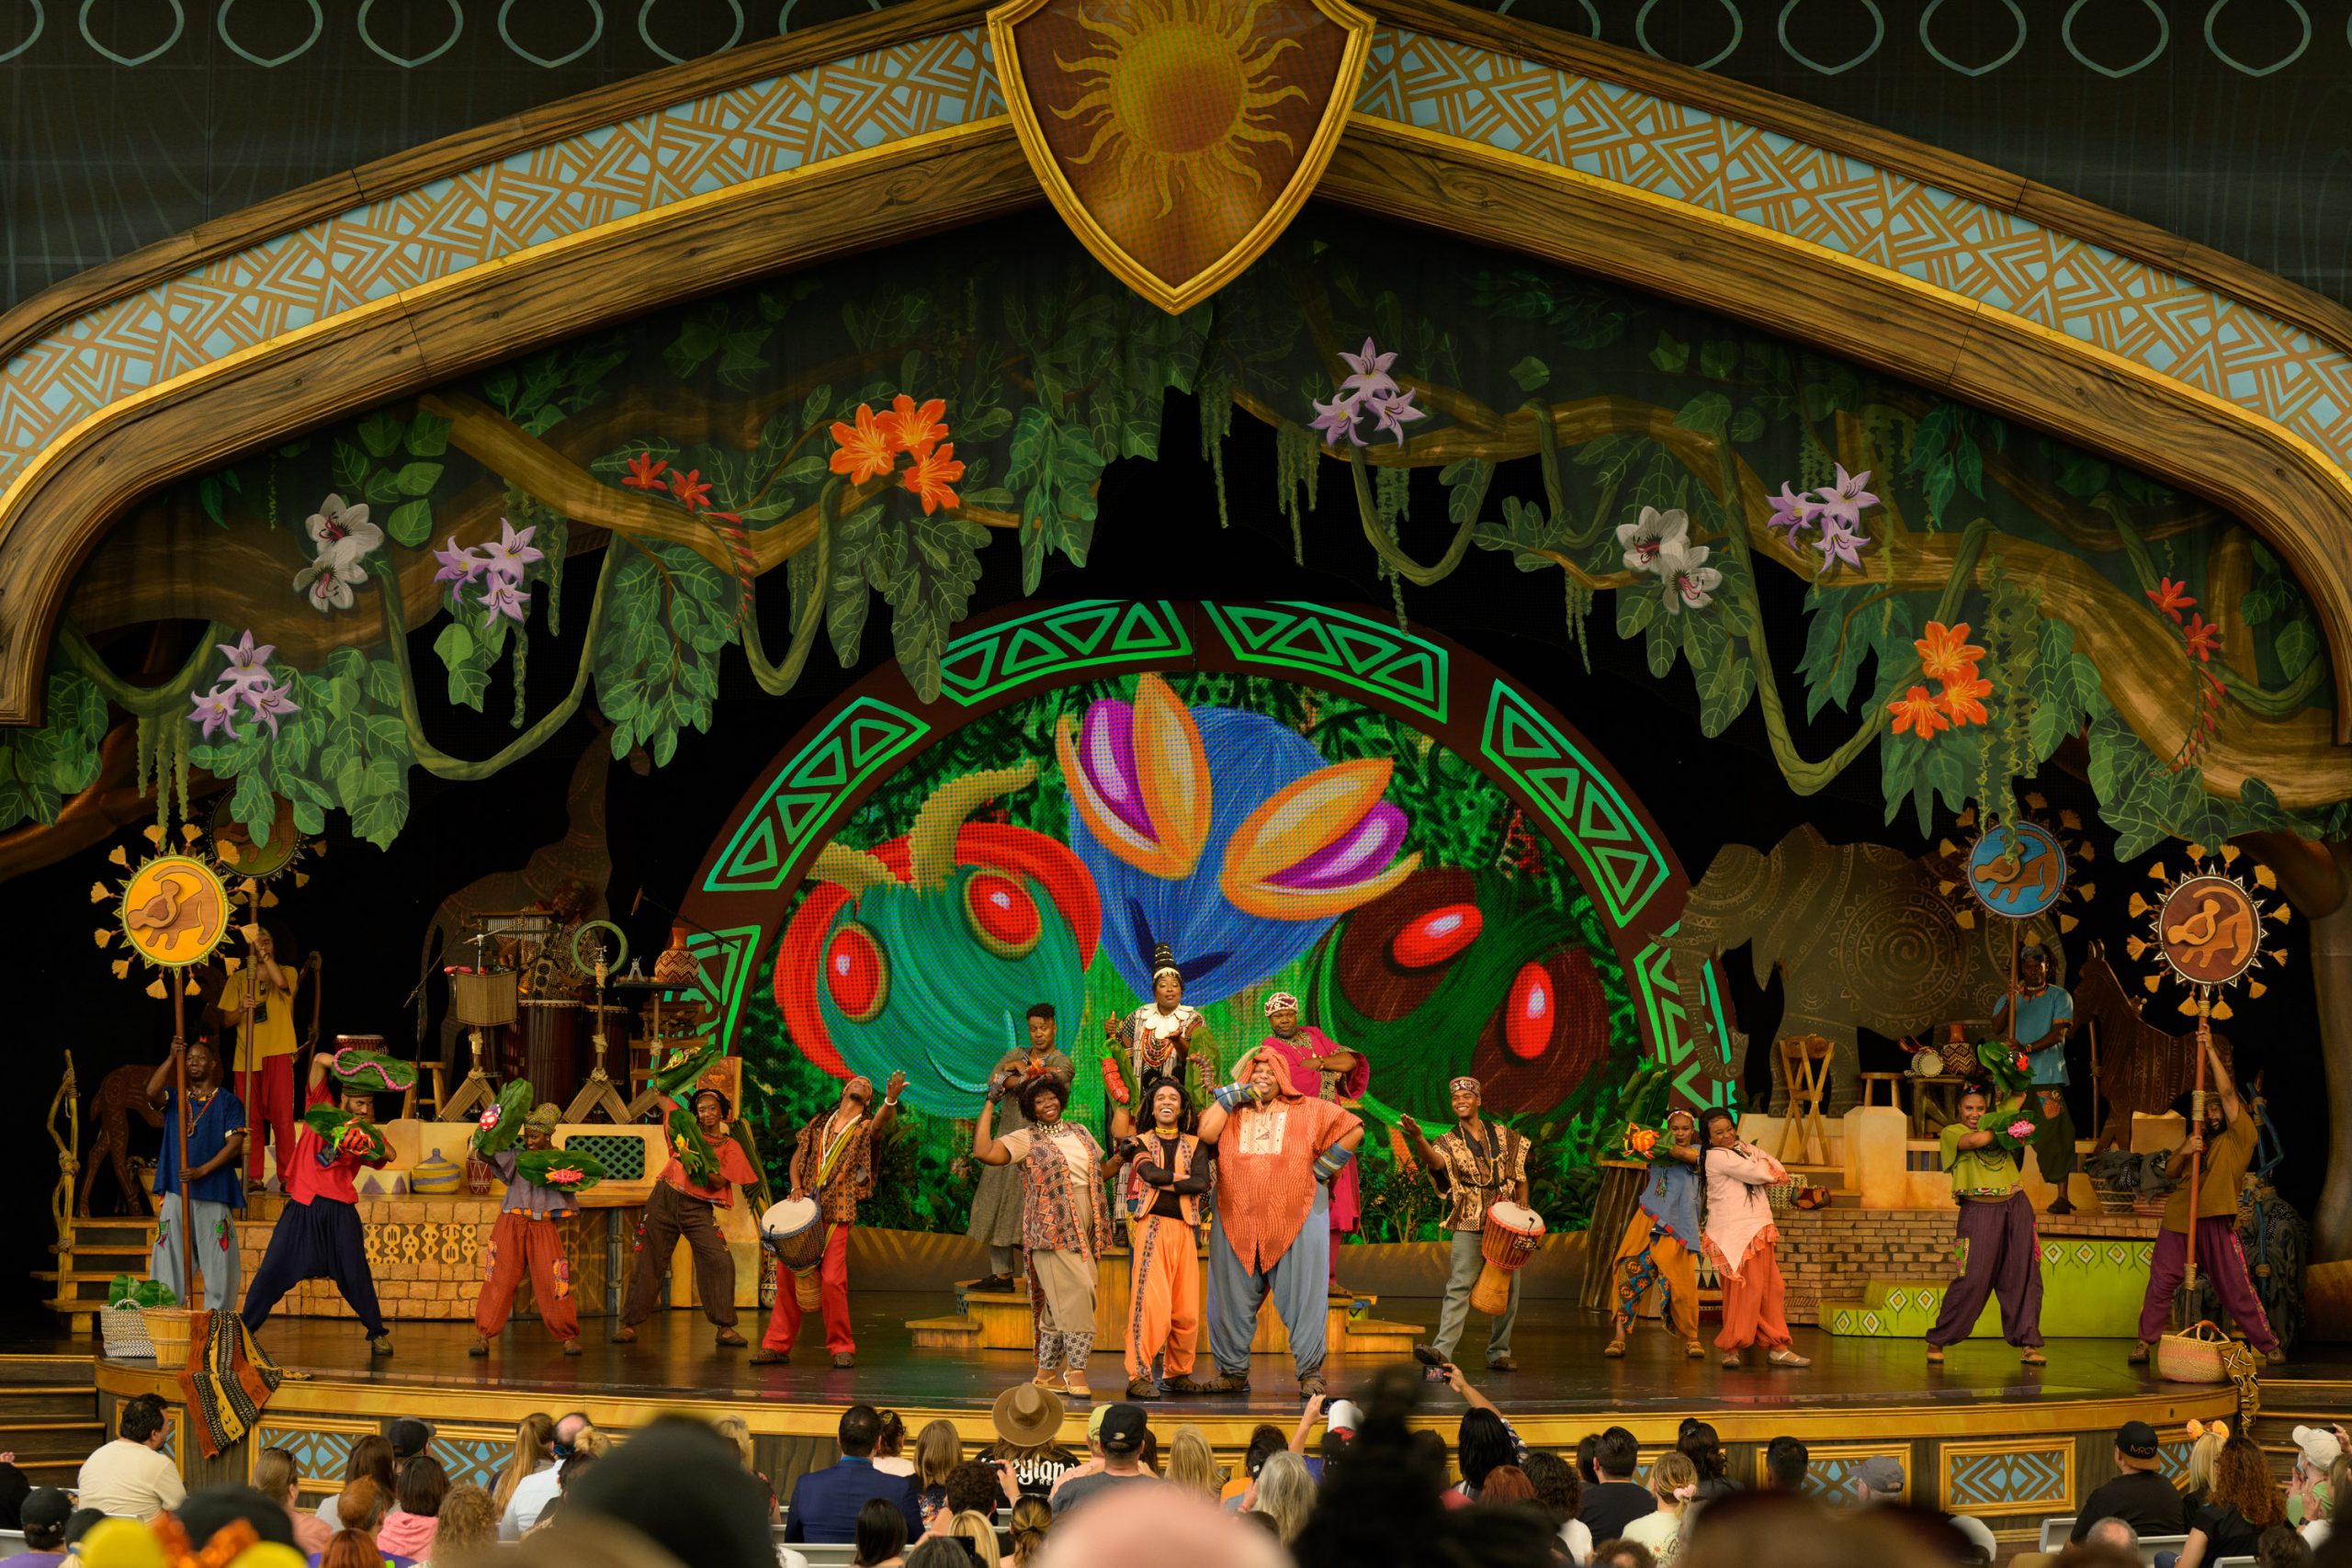 Tale of the Lion King show at Disneyland Resort